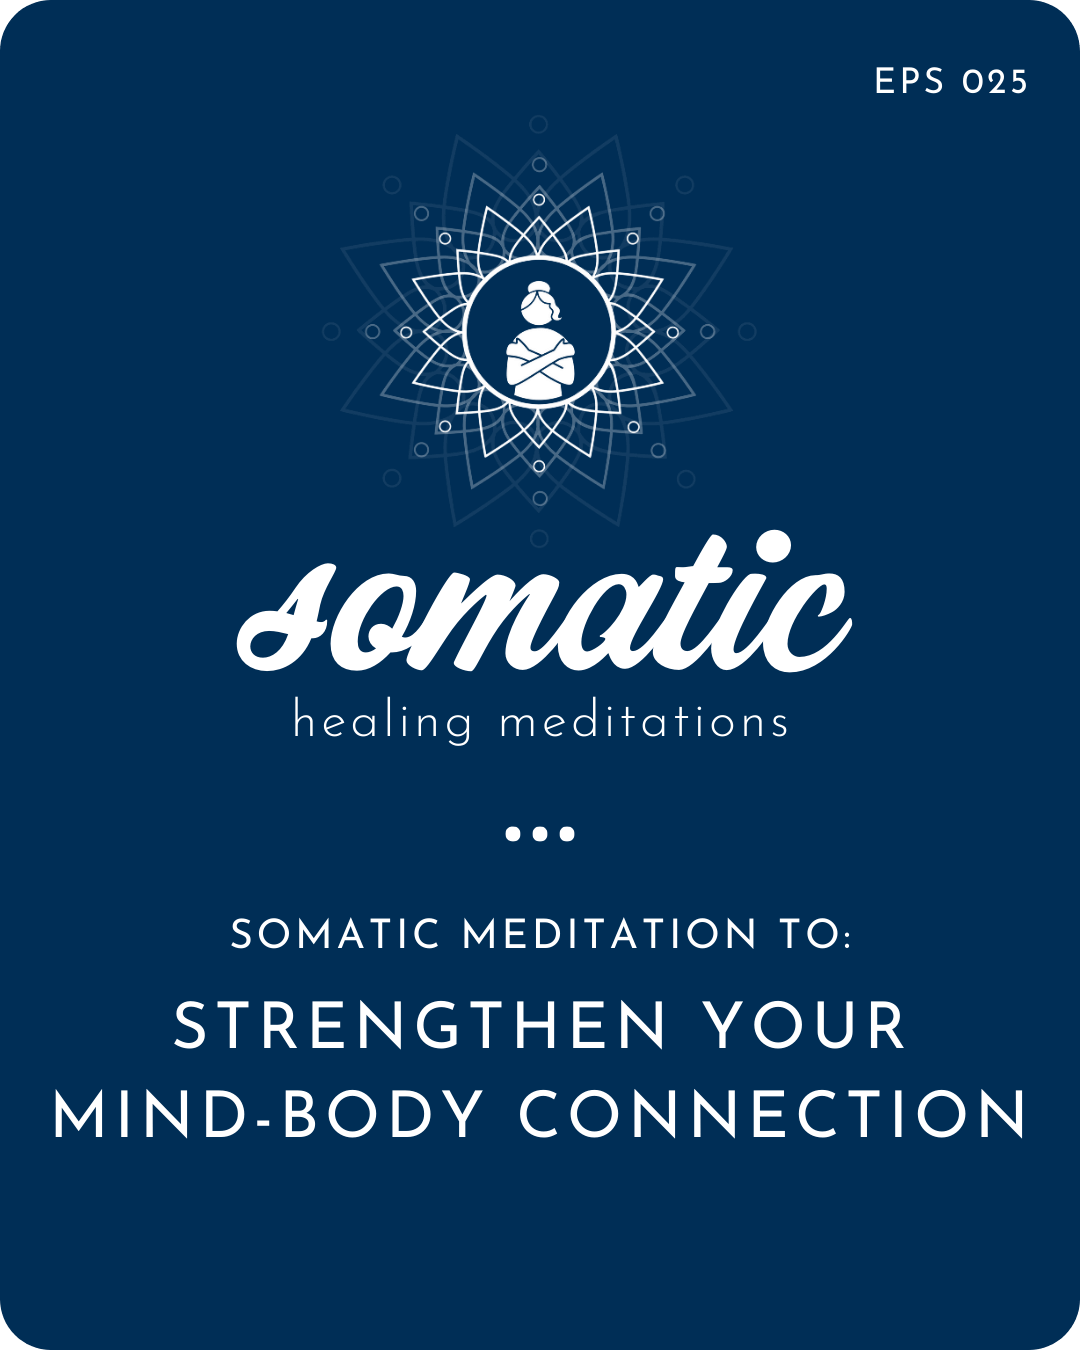 Guided Somatic Meditation to Strengthen Your Mind-Body Connection